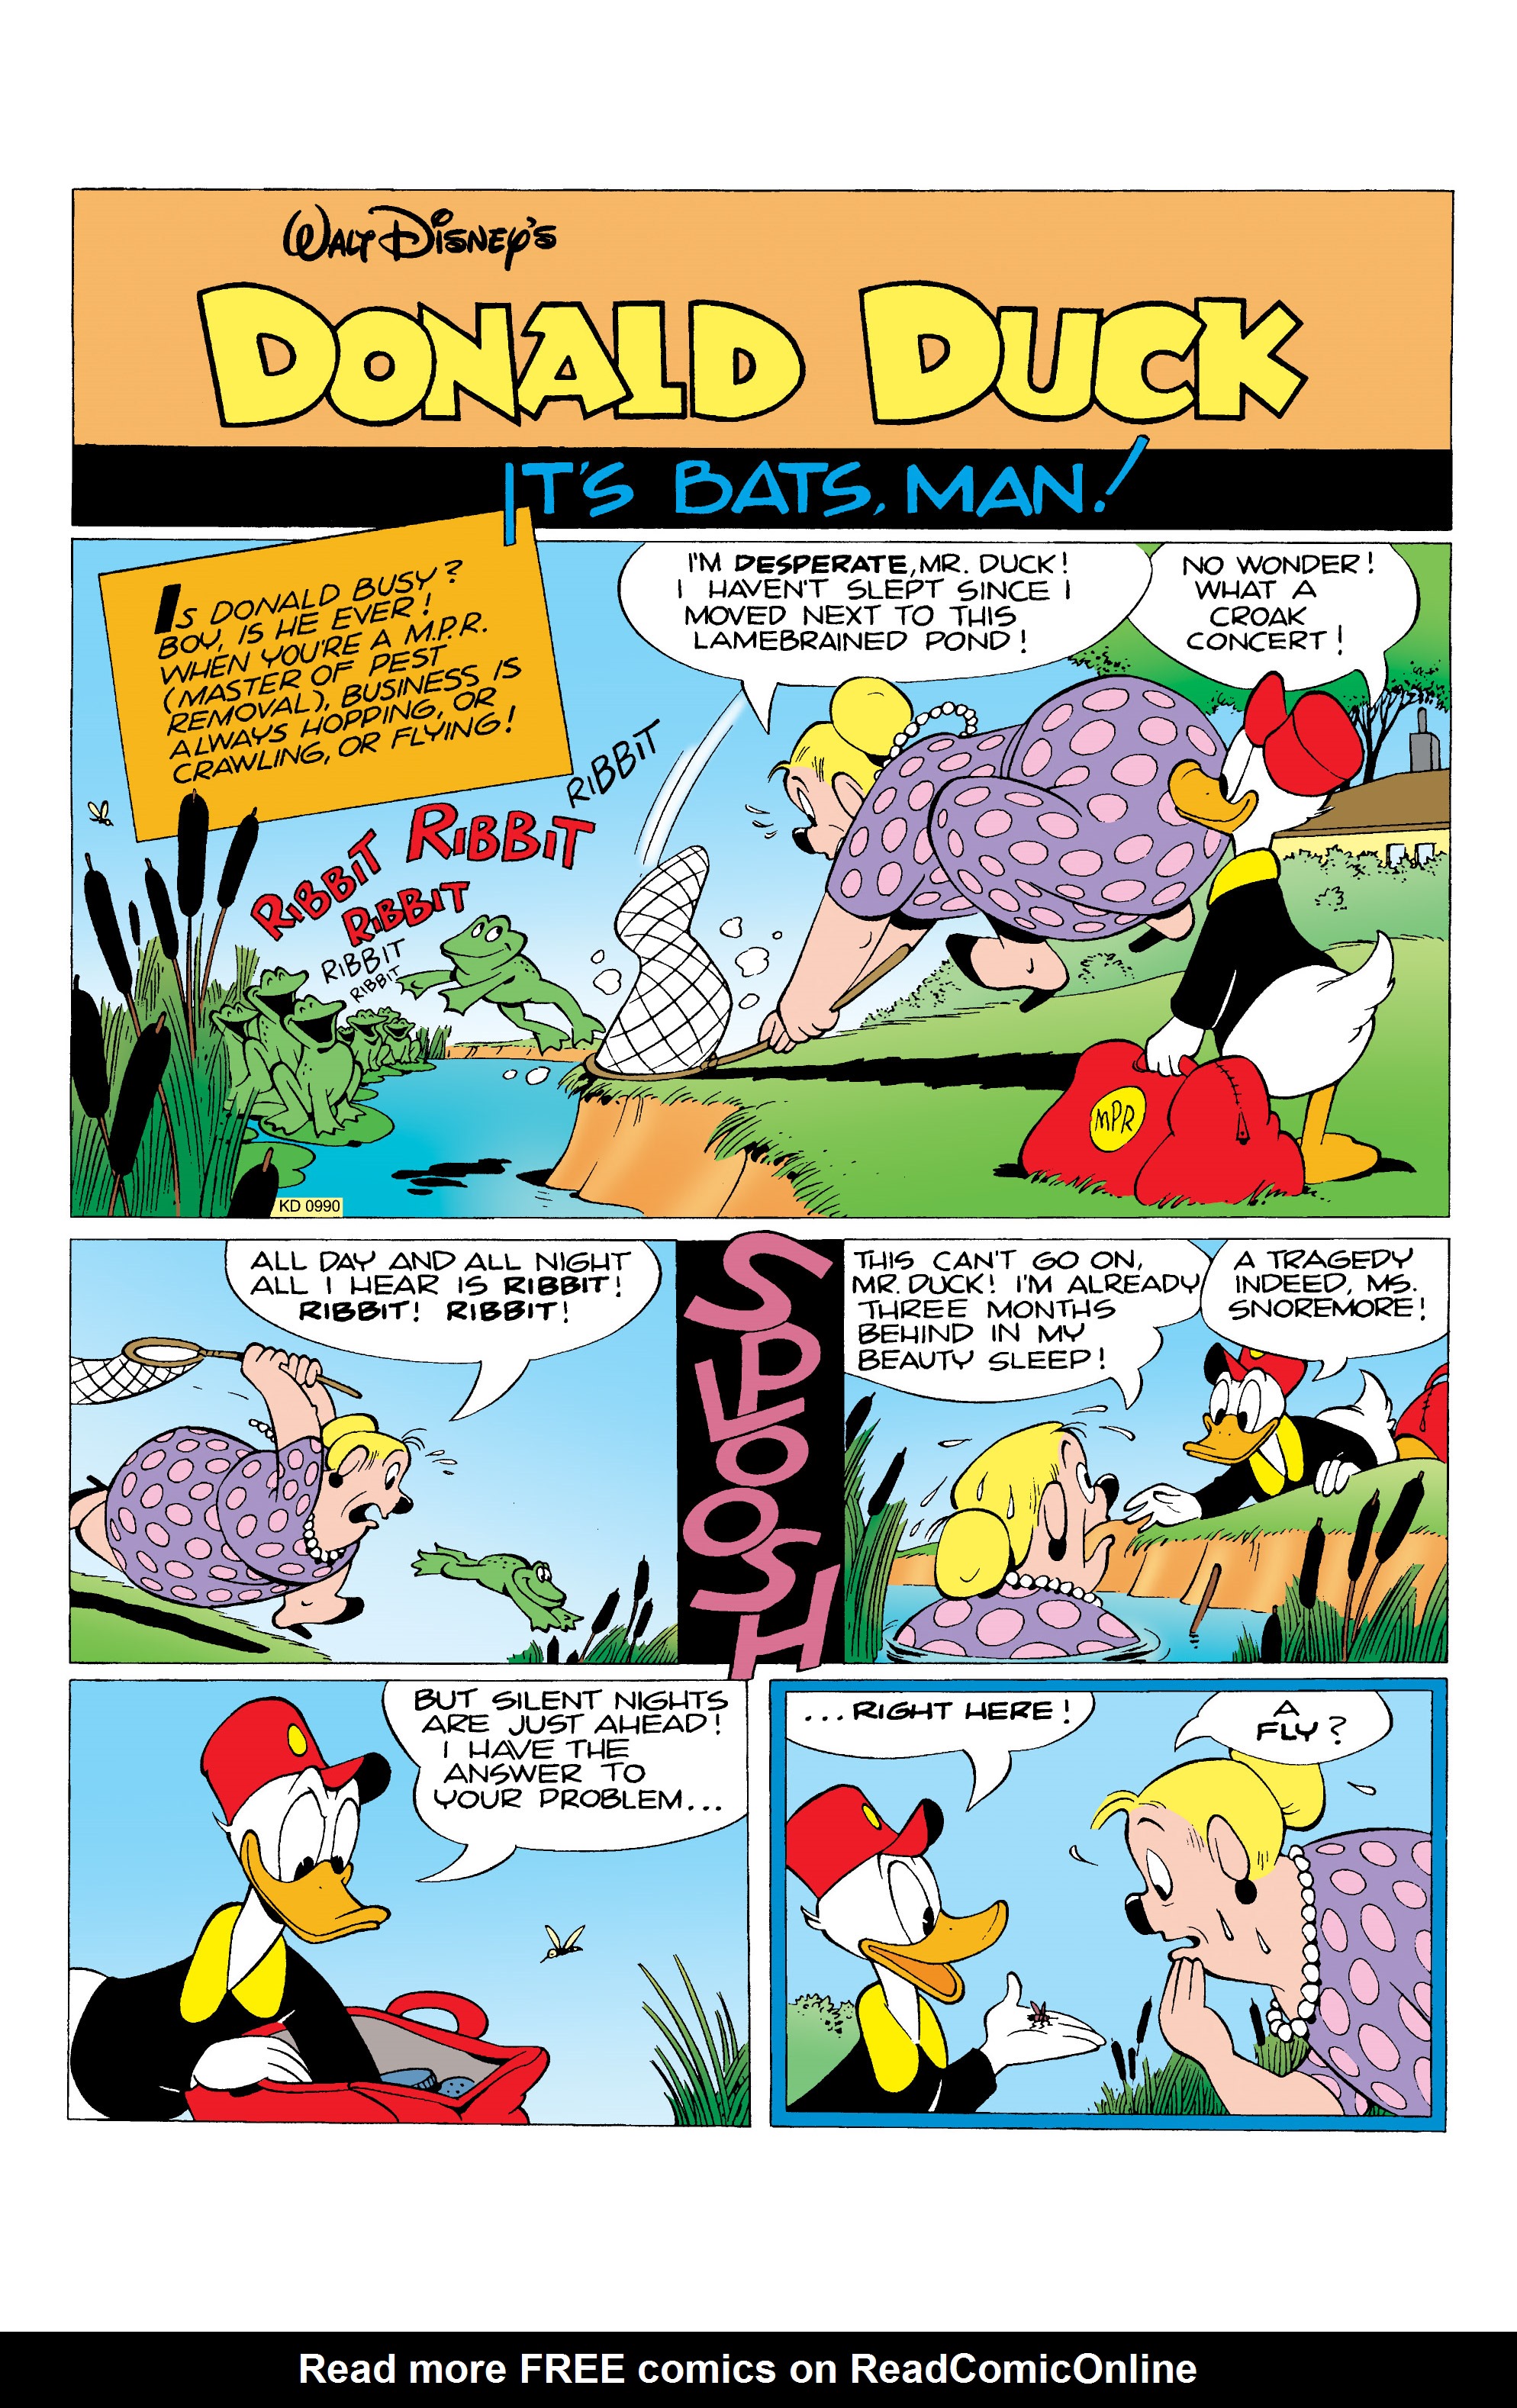 Read online Free Comic Book Day 2020 comic -  Issue # Disney Masters - Donald Duck - 3